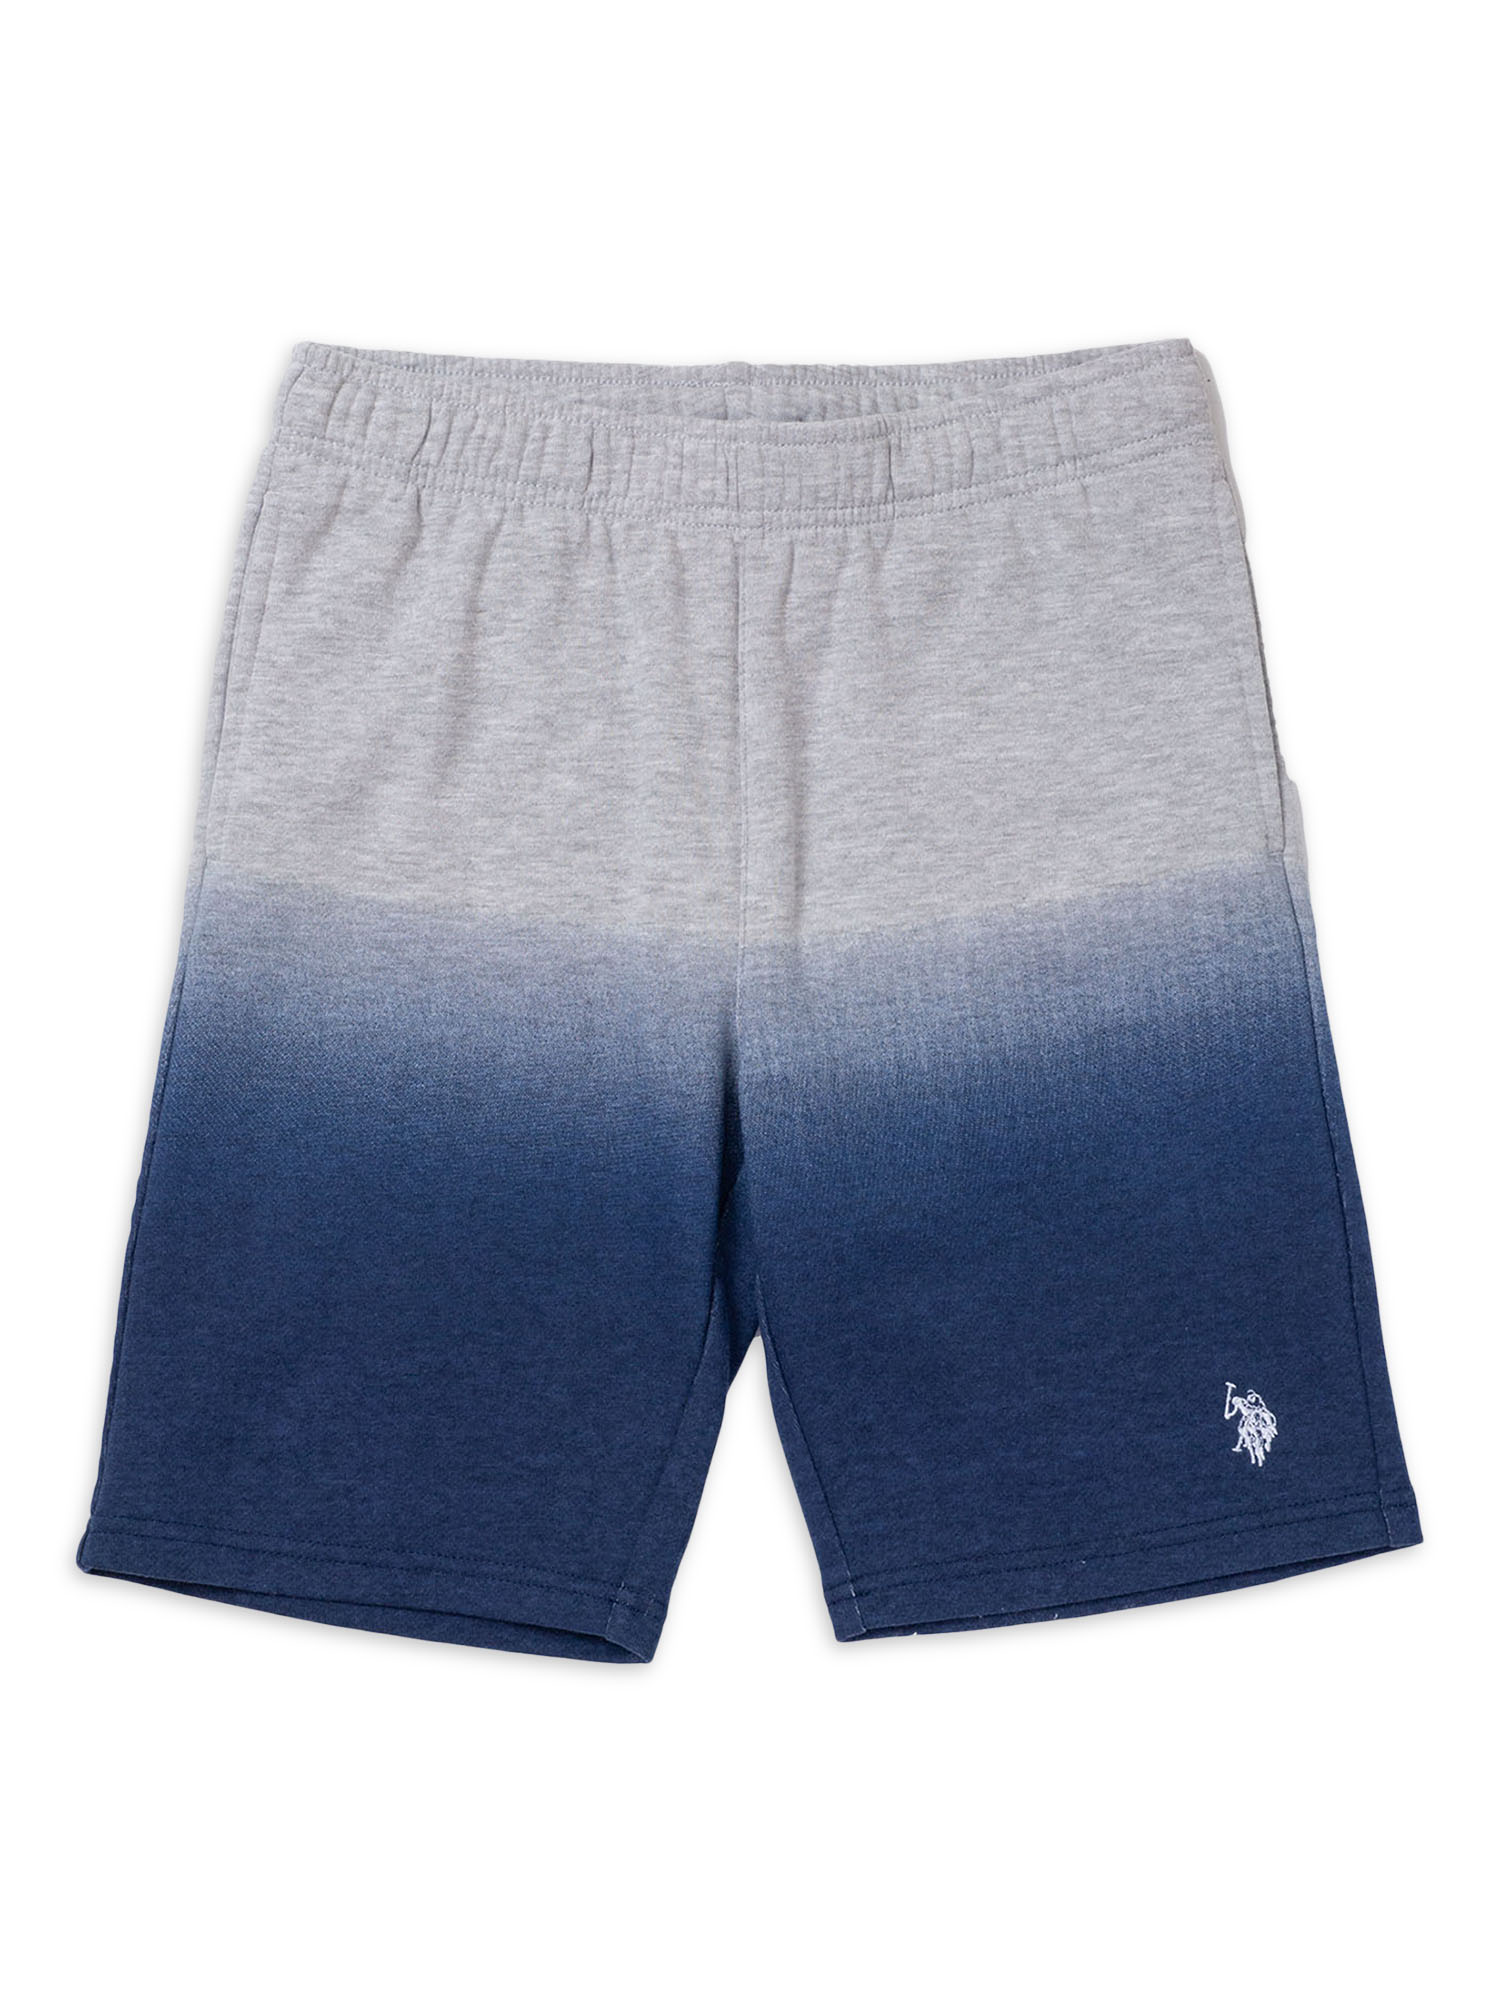 U.S Polo Assn. Performance Fleece 2-Pack Shorts, Sizes 4-18 - image 4 of 4